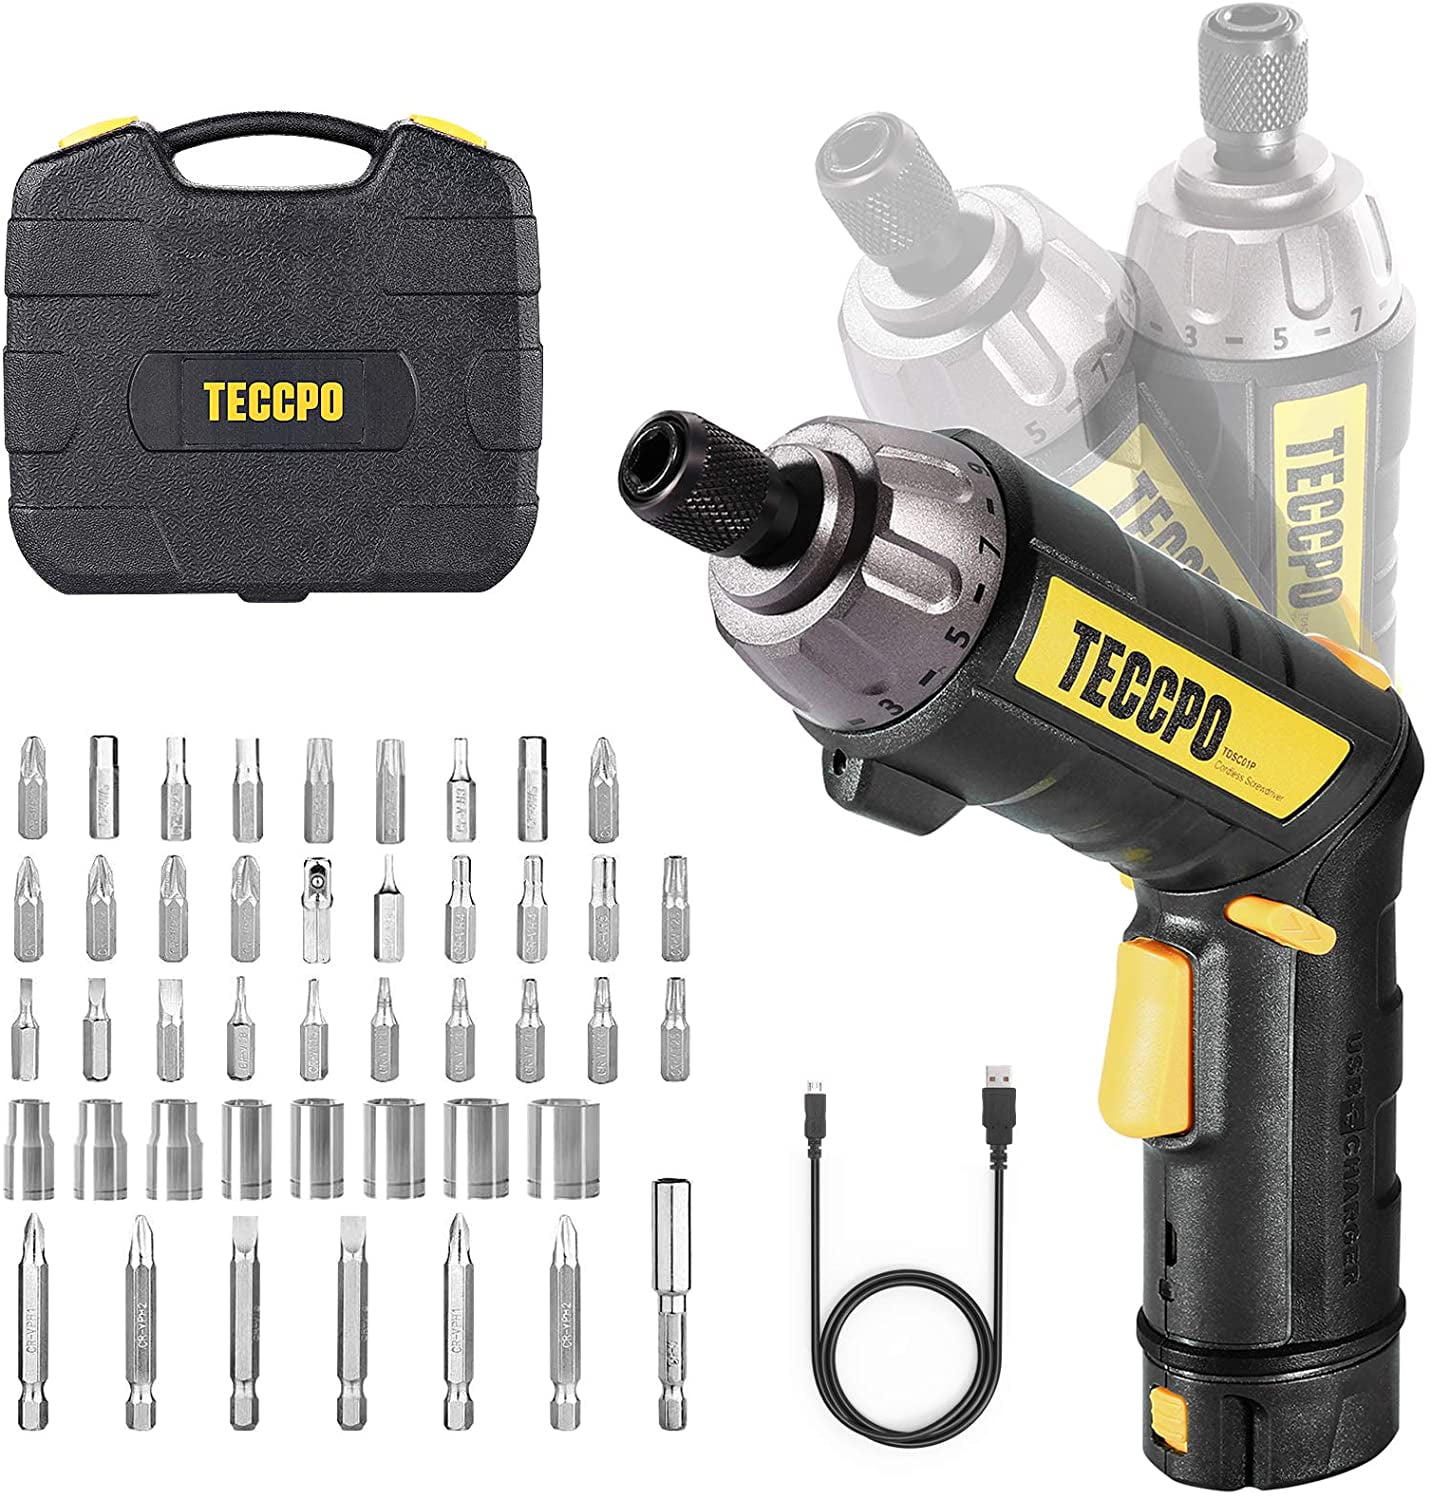 TECCPO TDSC01P Electric Screwdriver 6Nm TECCPO Cordless Screwdriver Adjustable 2 Position Handle with LED 4V 2000mAh Li-ion 9+1 Torque Gears with 45 Free Accessories USB Rechargeable 